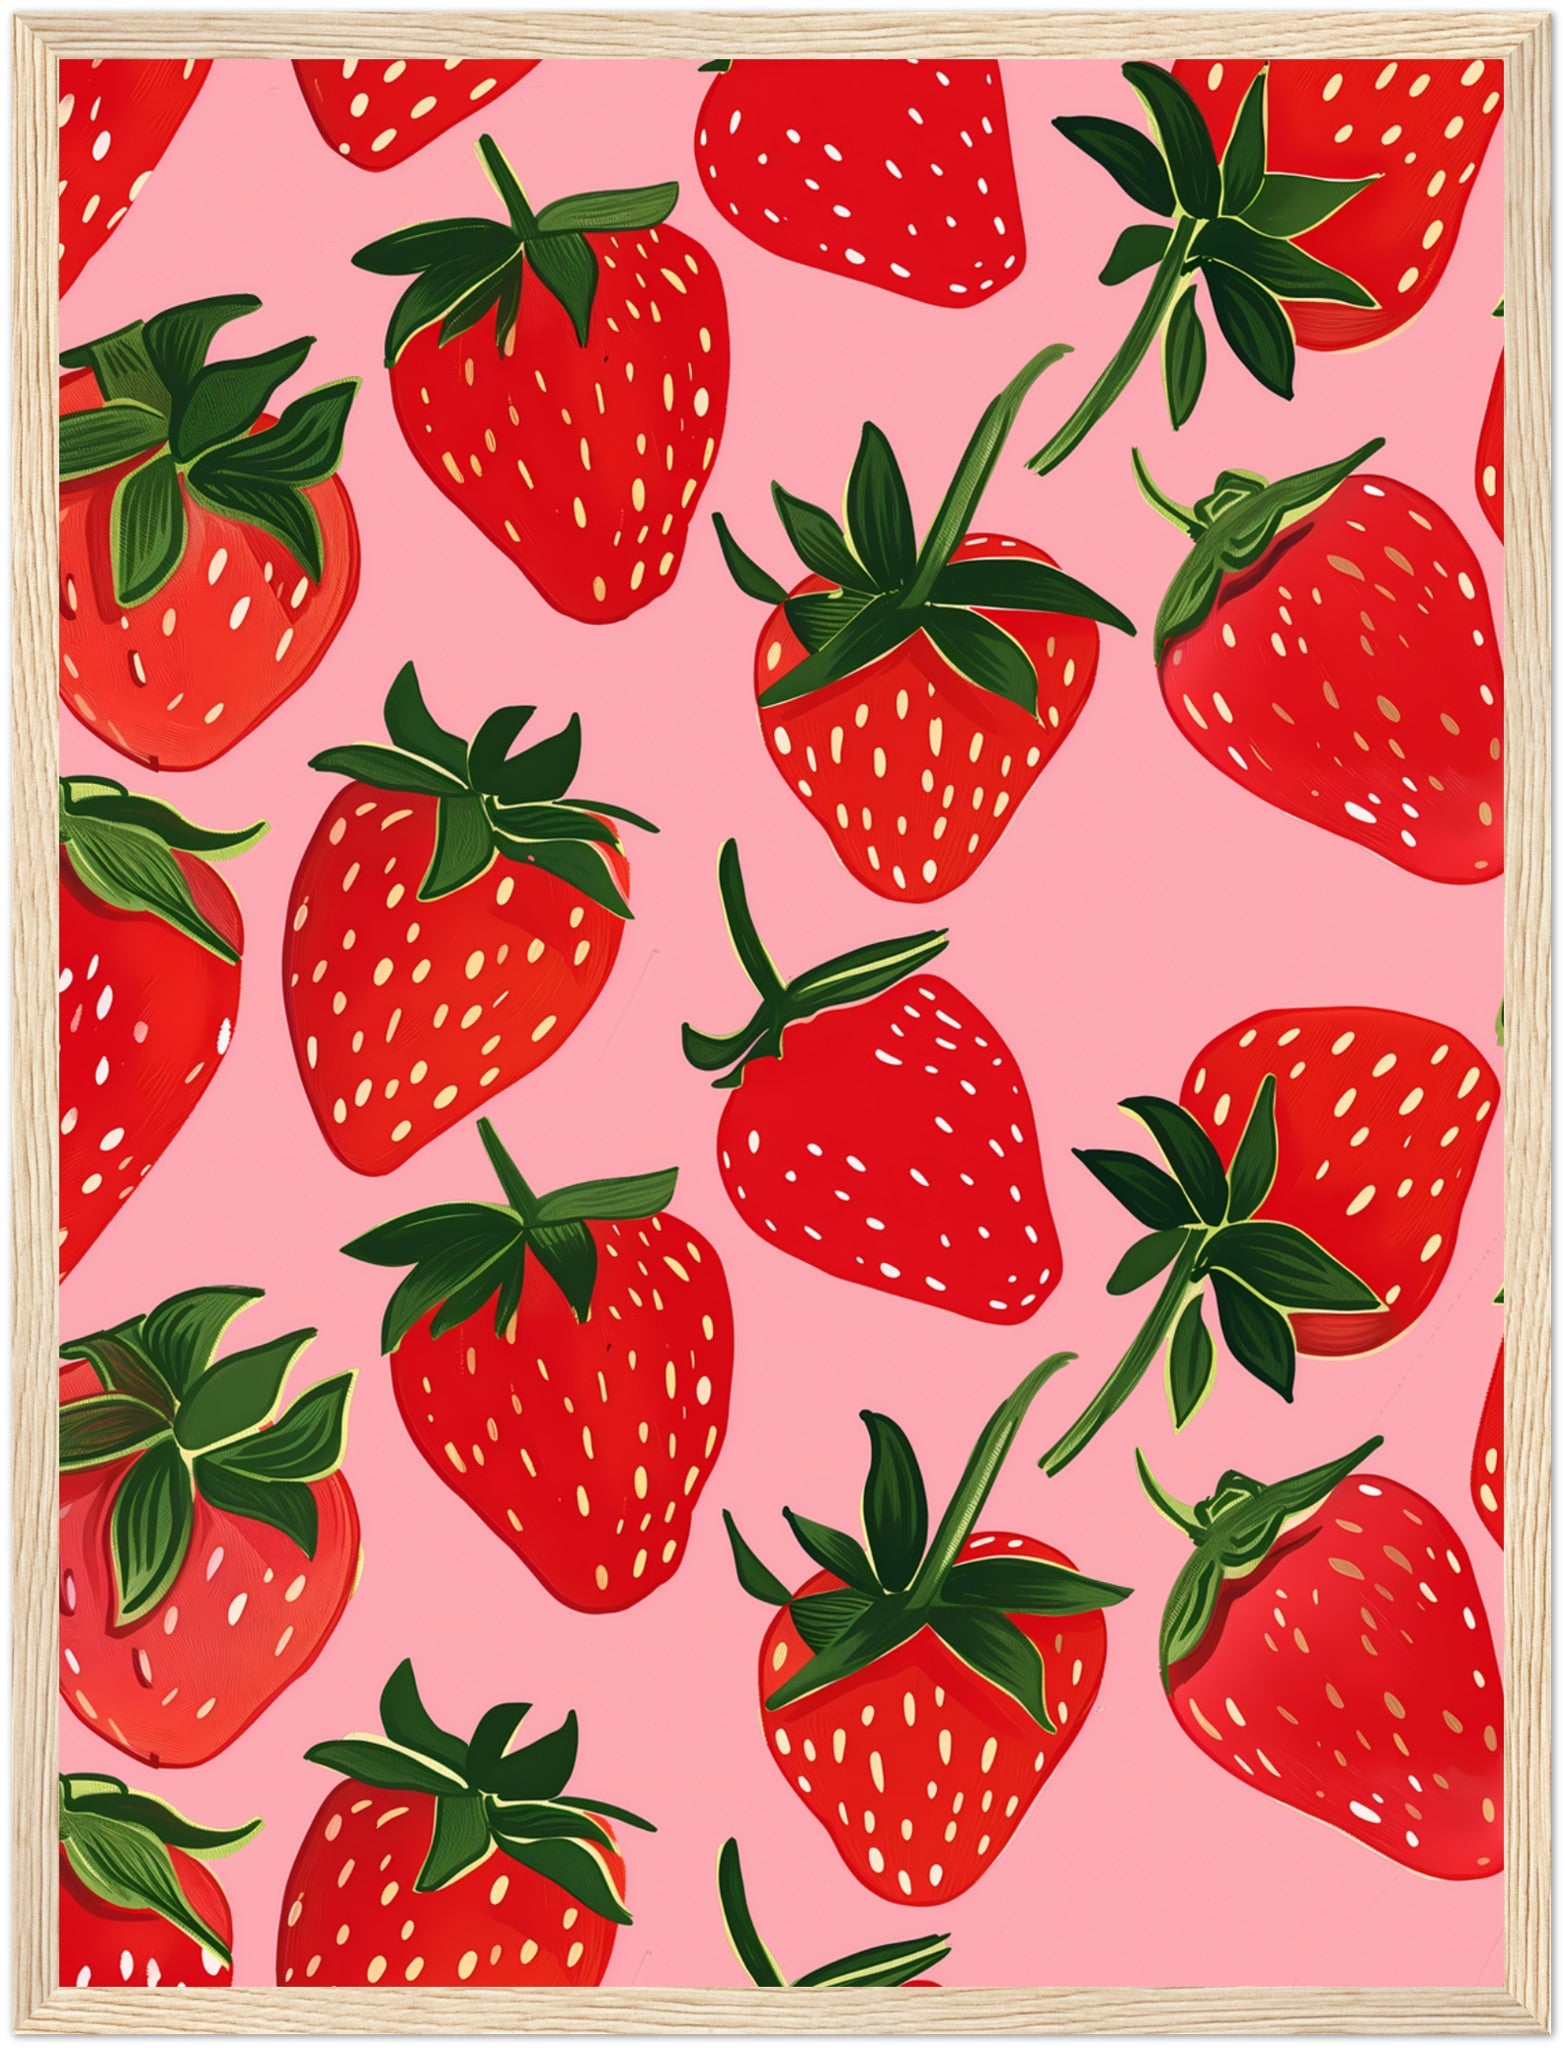 Colorful illustration of strawberries on a pink background.